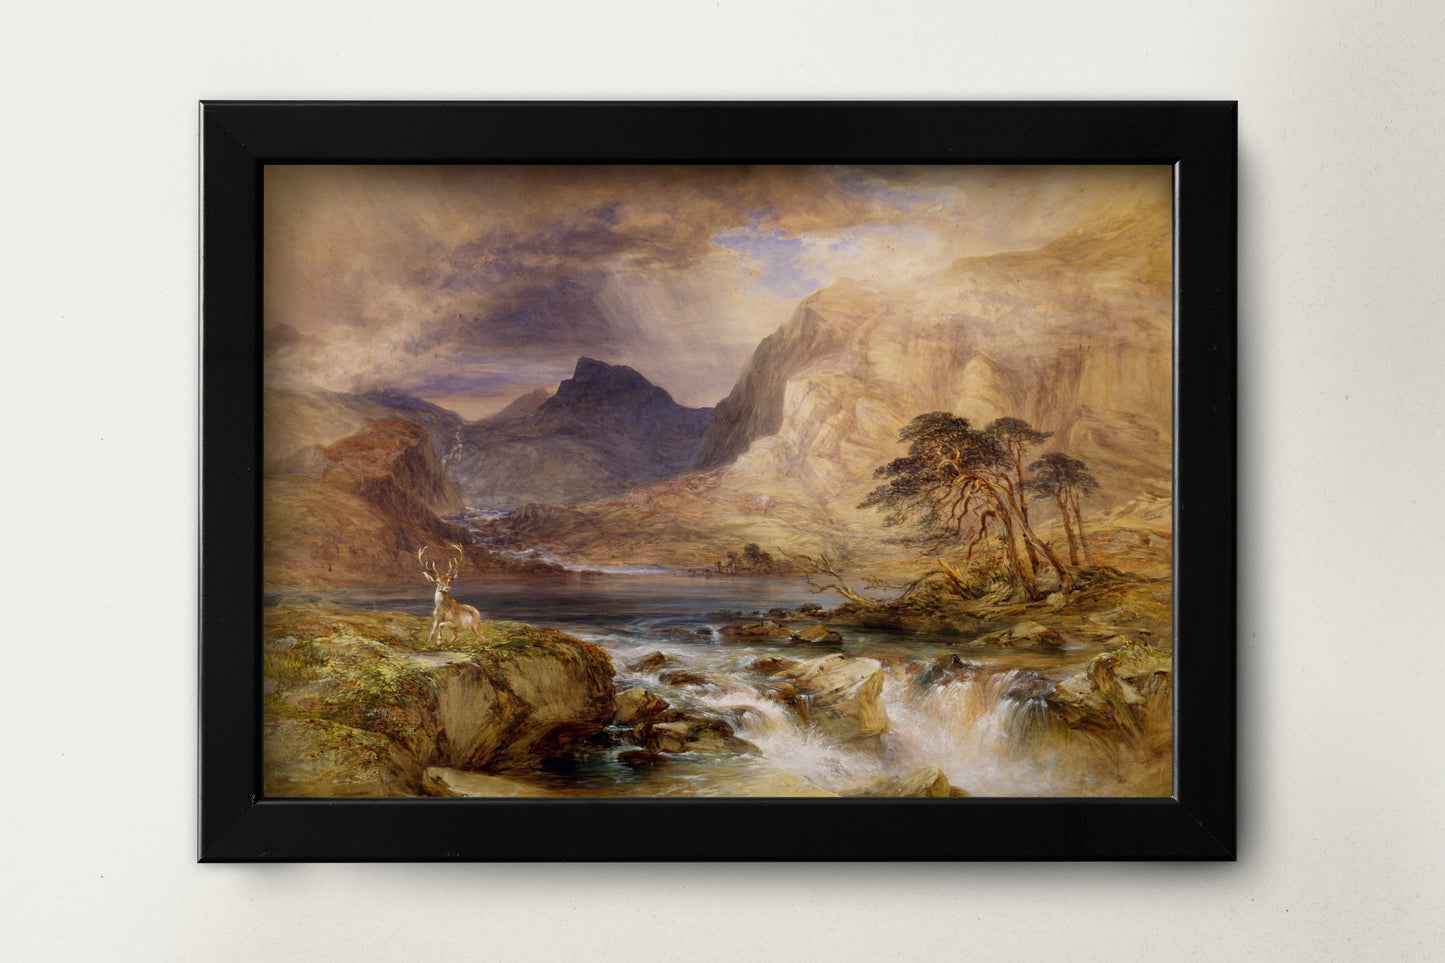 Beautiful Illustration Brodick Isle Of Arran Scotland 1849-1851 by William Andrews Nesfield Painting Print Poster Wall Hanging Decor